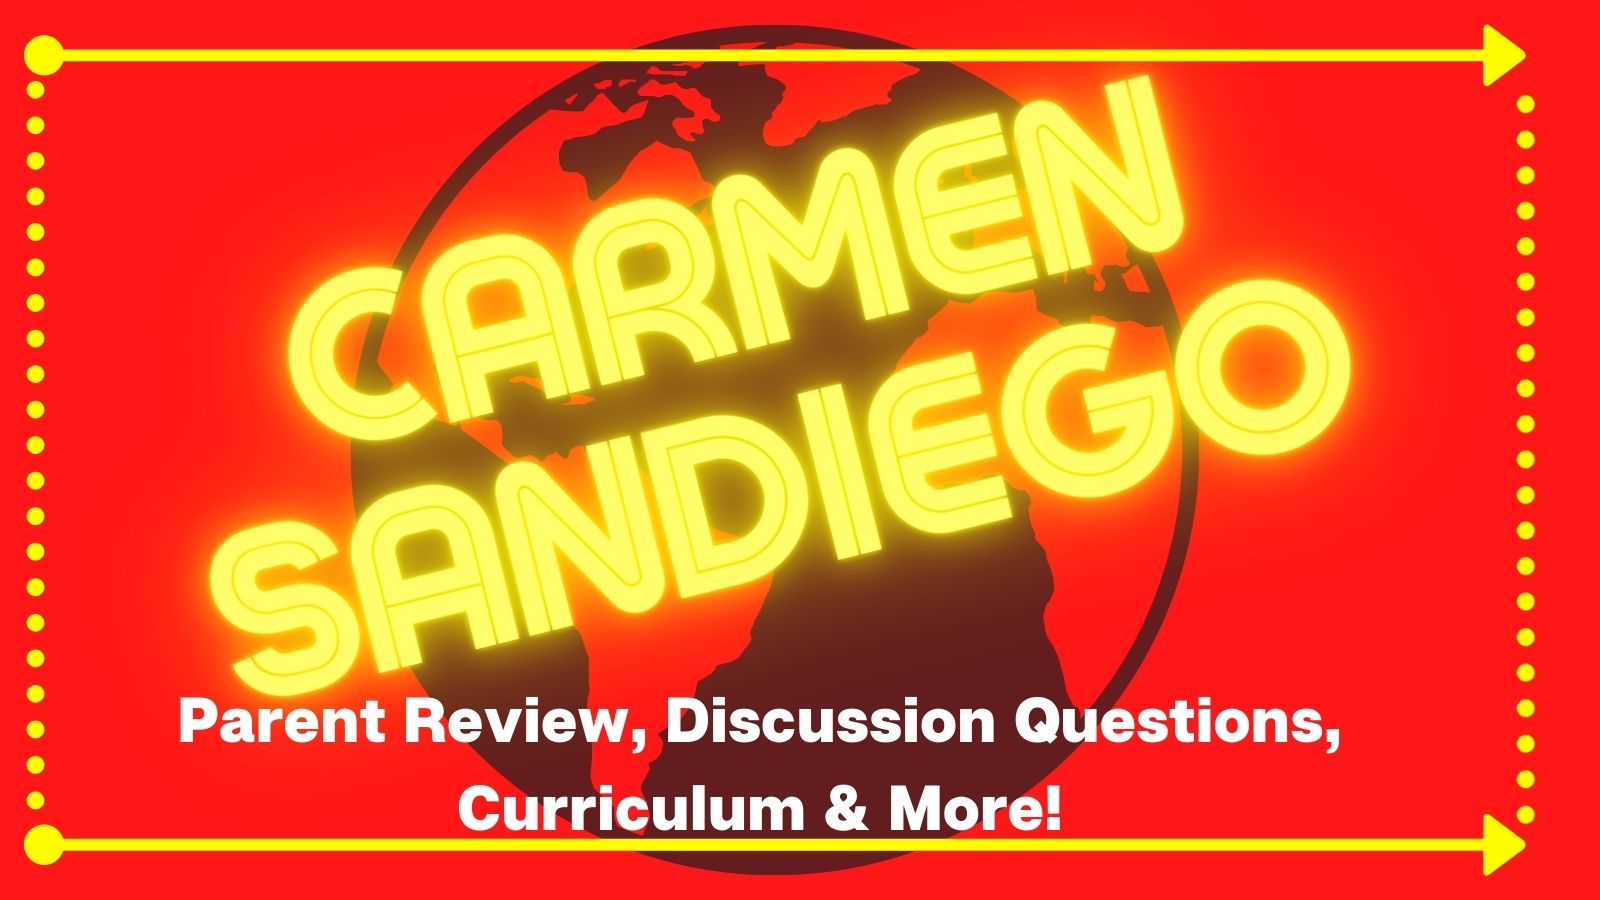 Carmen Sandiego: To Steal or Not To Steal? Interactive Game